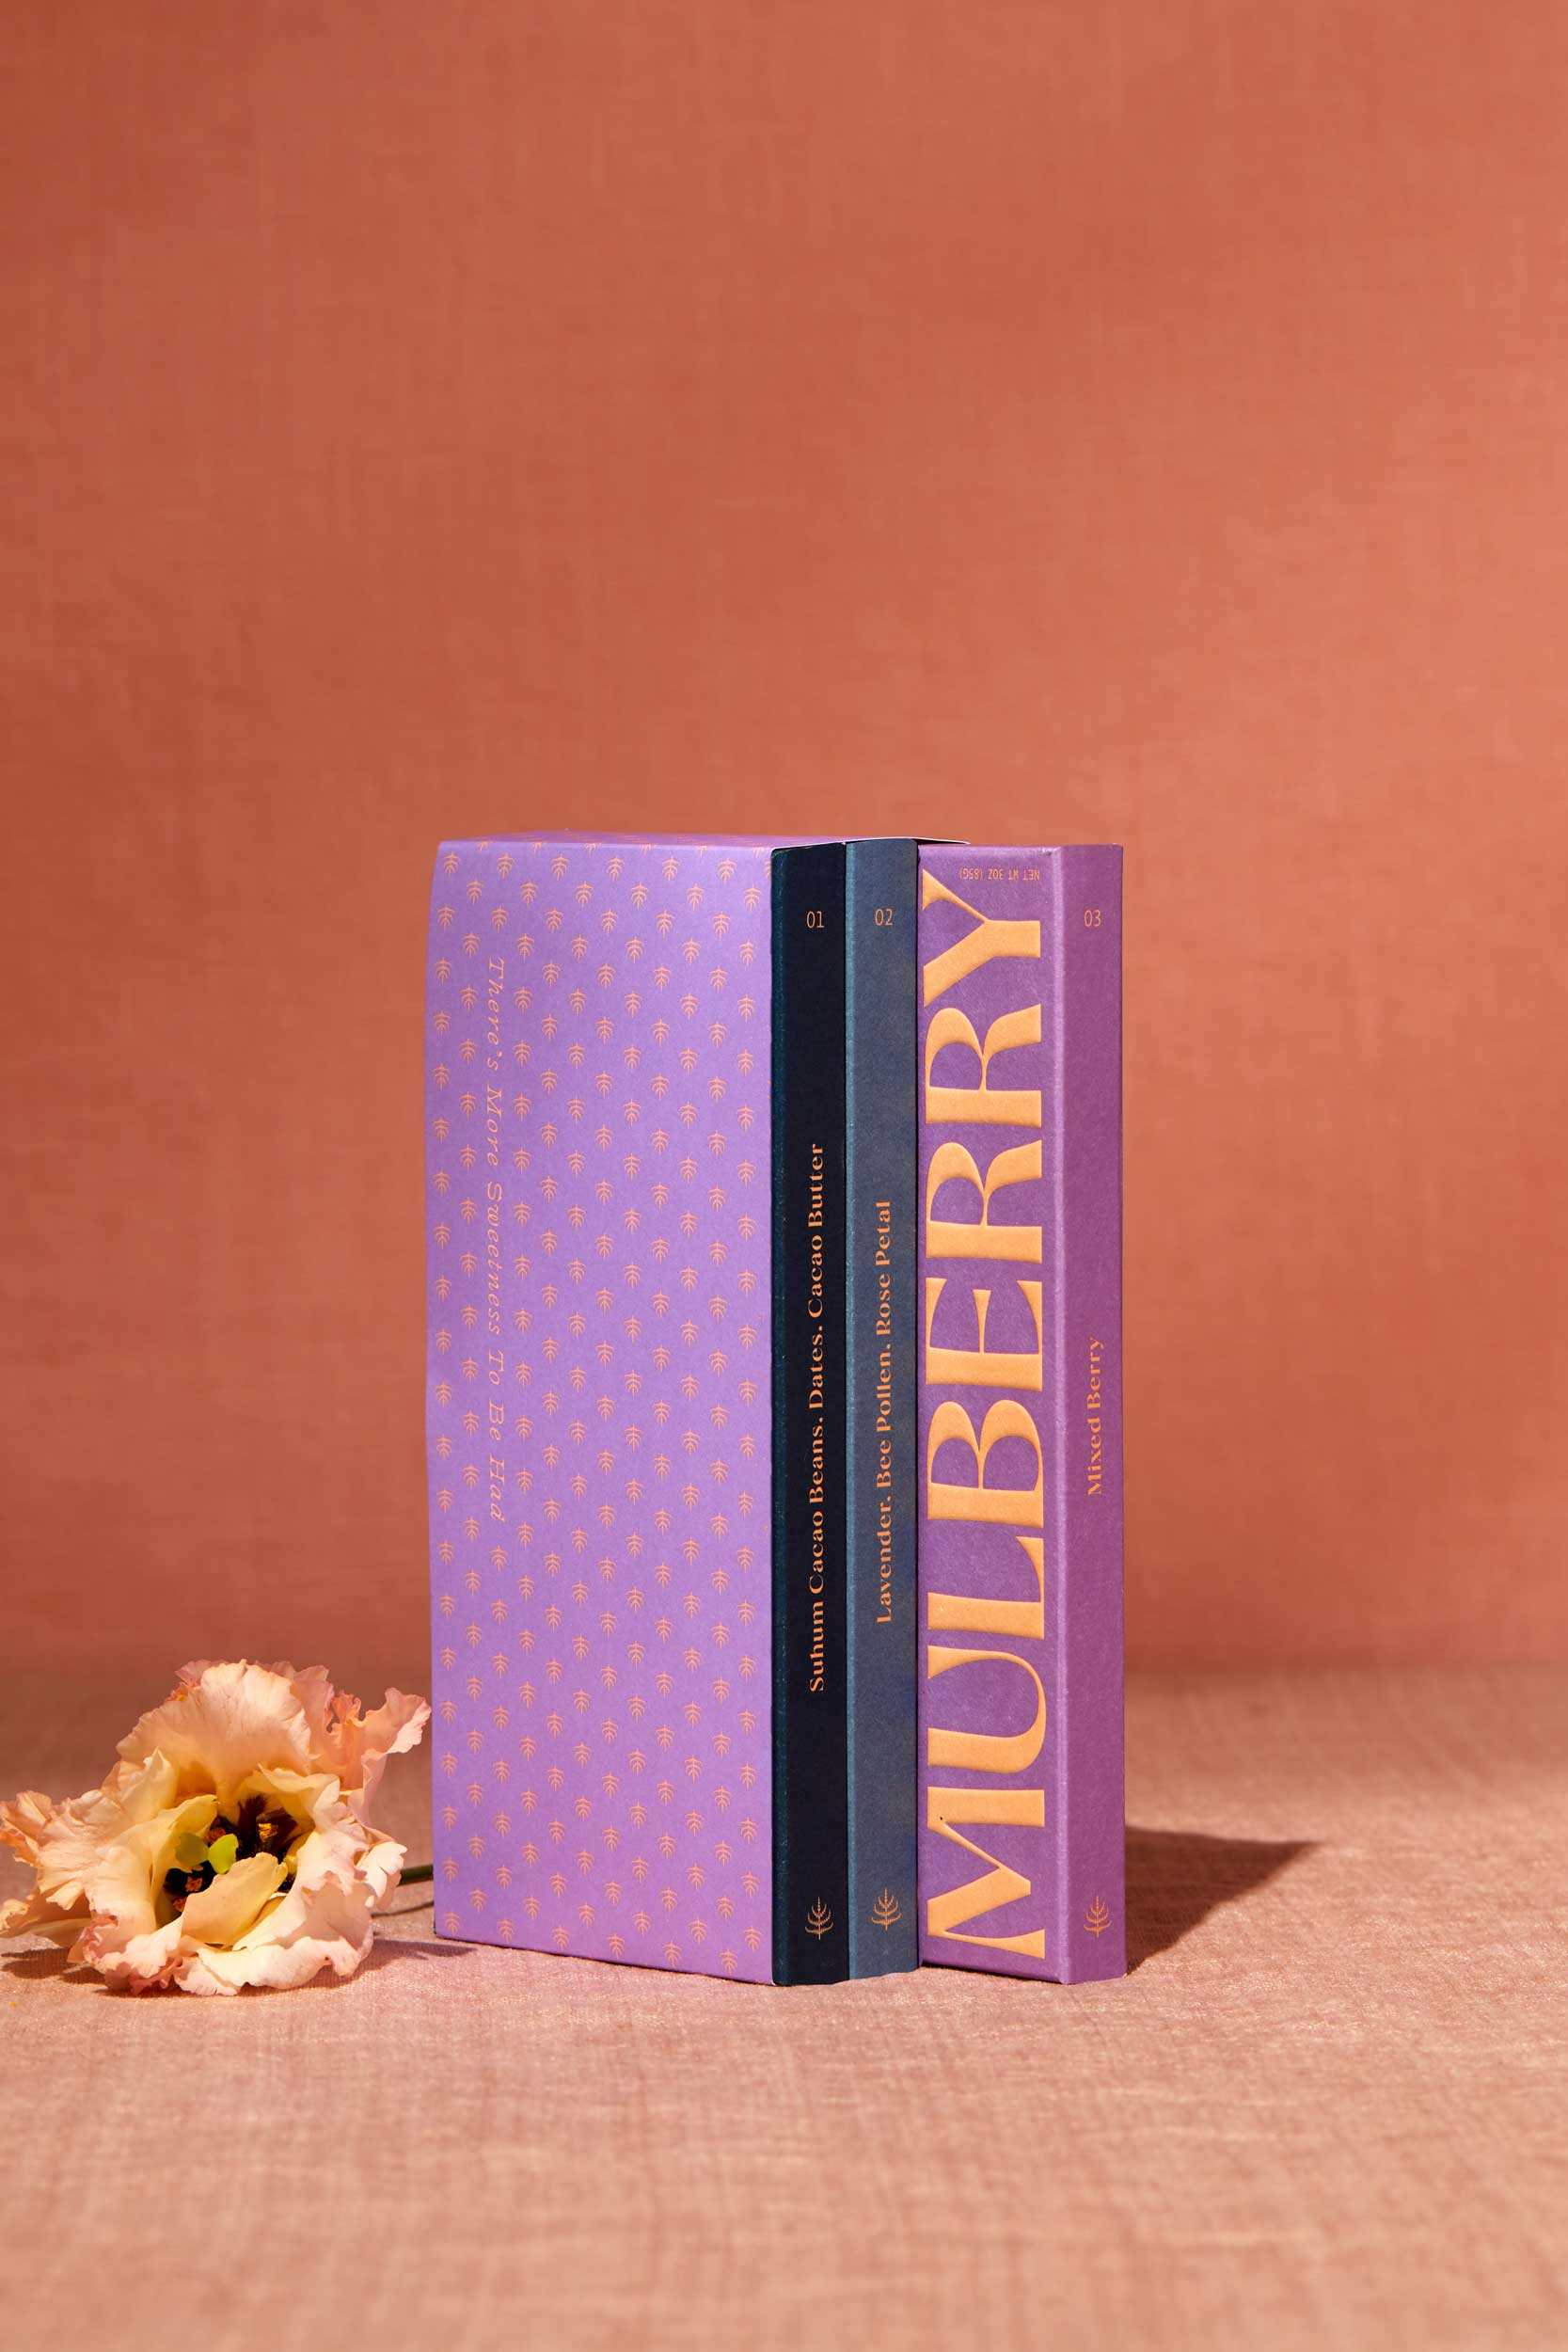 A gift set of 3 date sweetened chocolate bars with no added sugar stands on a peach linen backdrop. To the left of the gift set is a delicate flower. The gift set resembles a library set of books and is wrapped in purple paper adorned with a mulberry motif. The 3 chocolate boxes include: Pure Dark in a navy box; Lavender, Bee Pollen, Rose Petal in a sky blue box; and, Mixed Berry in a purple box.